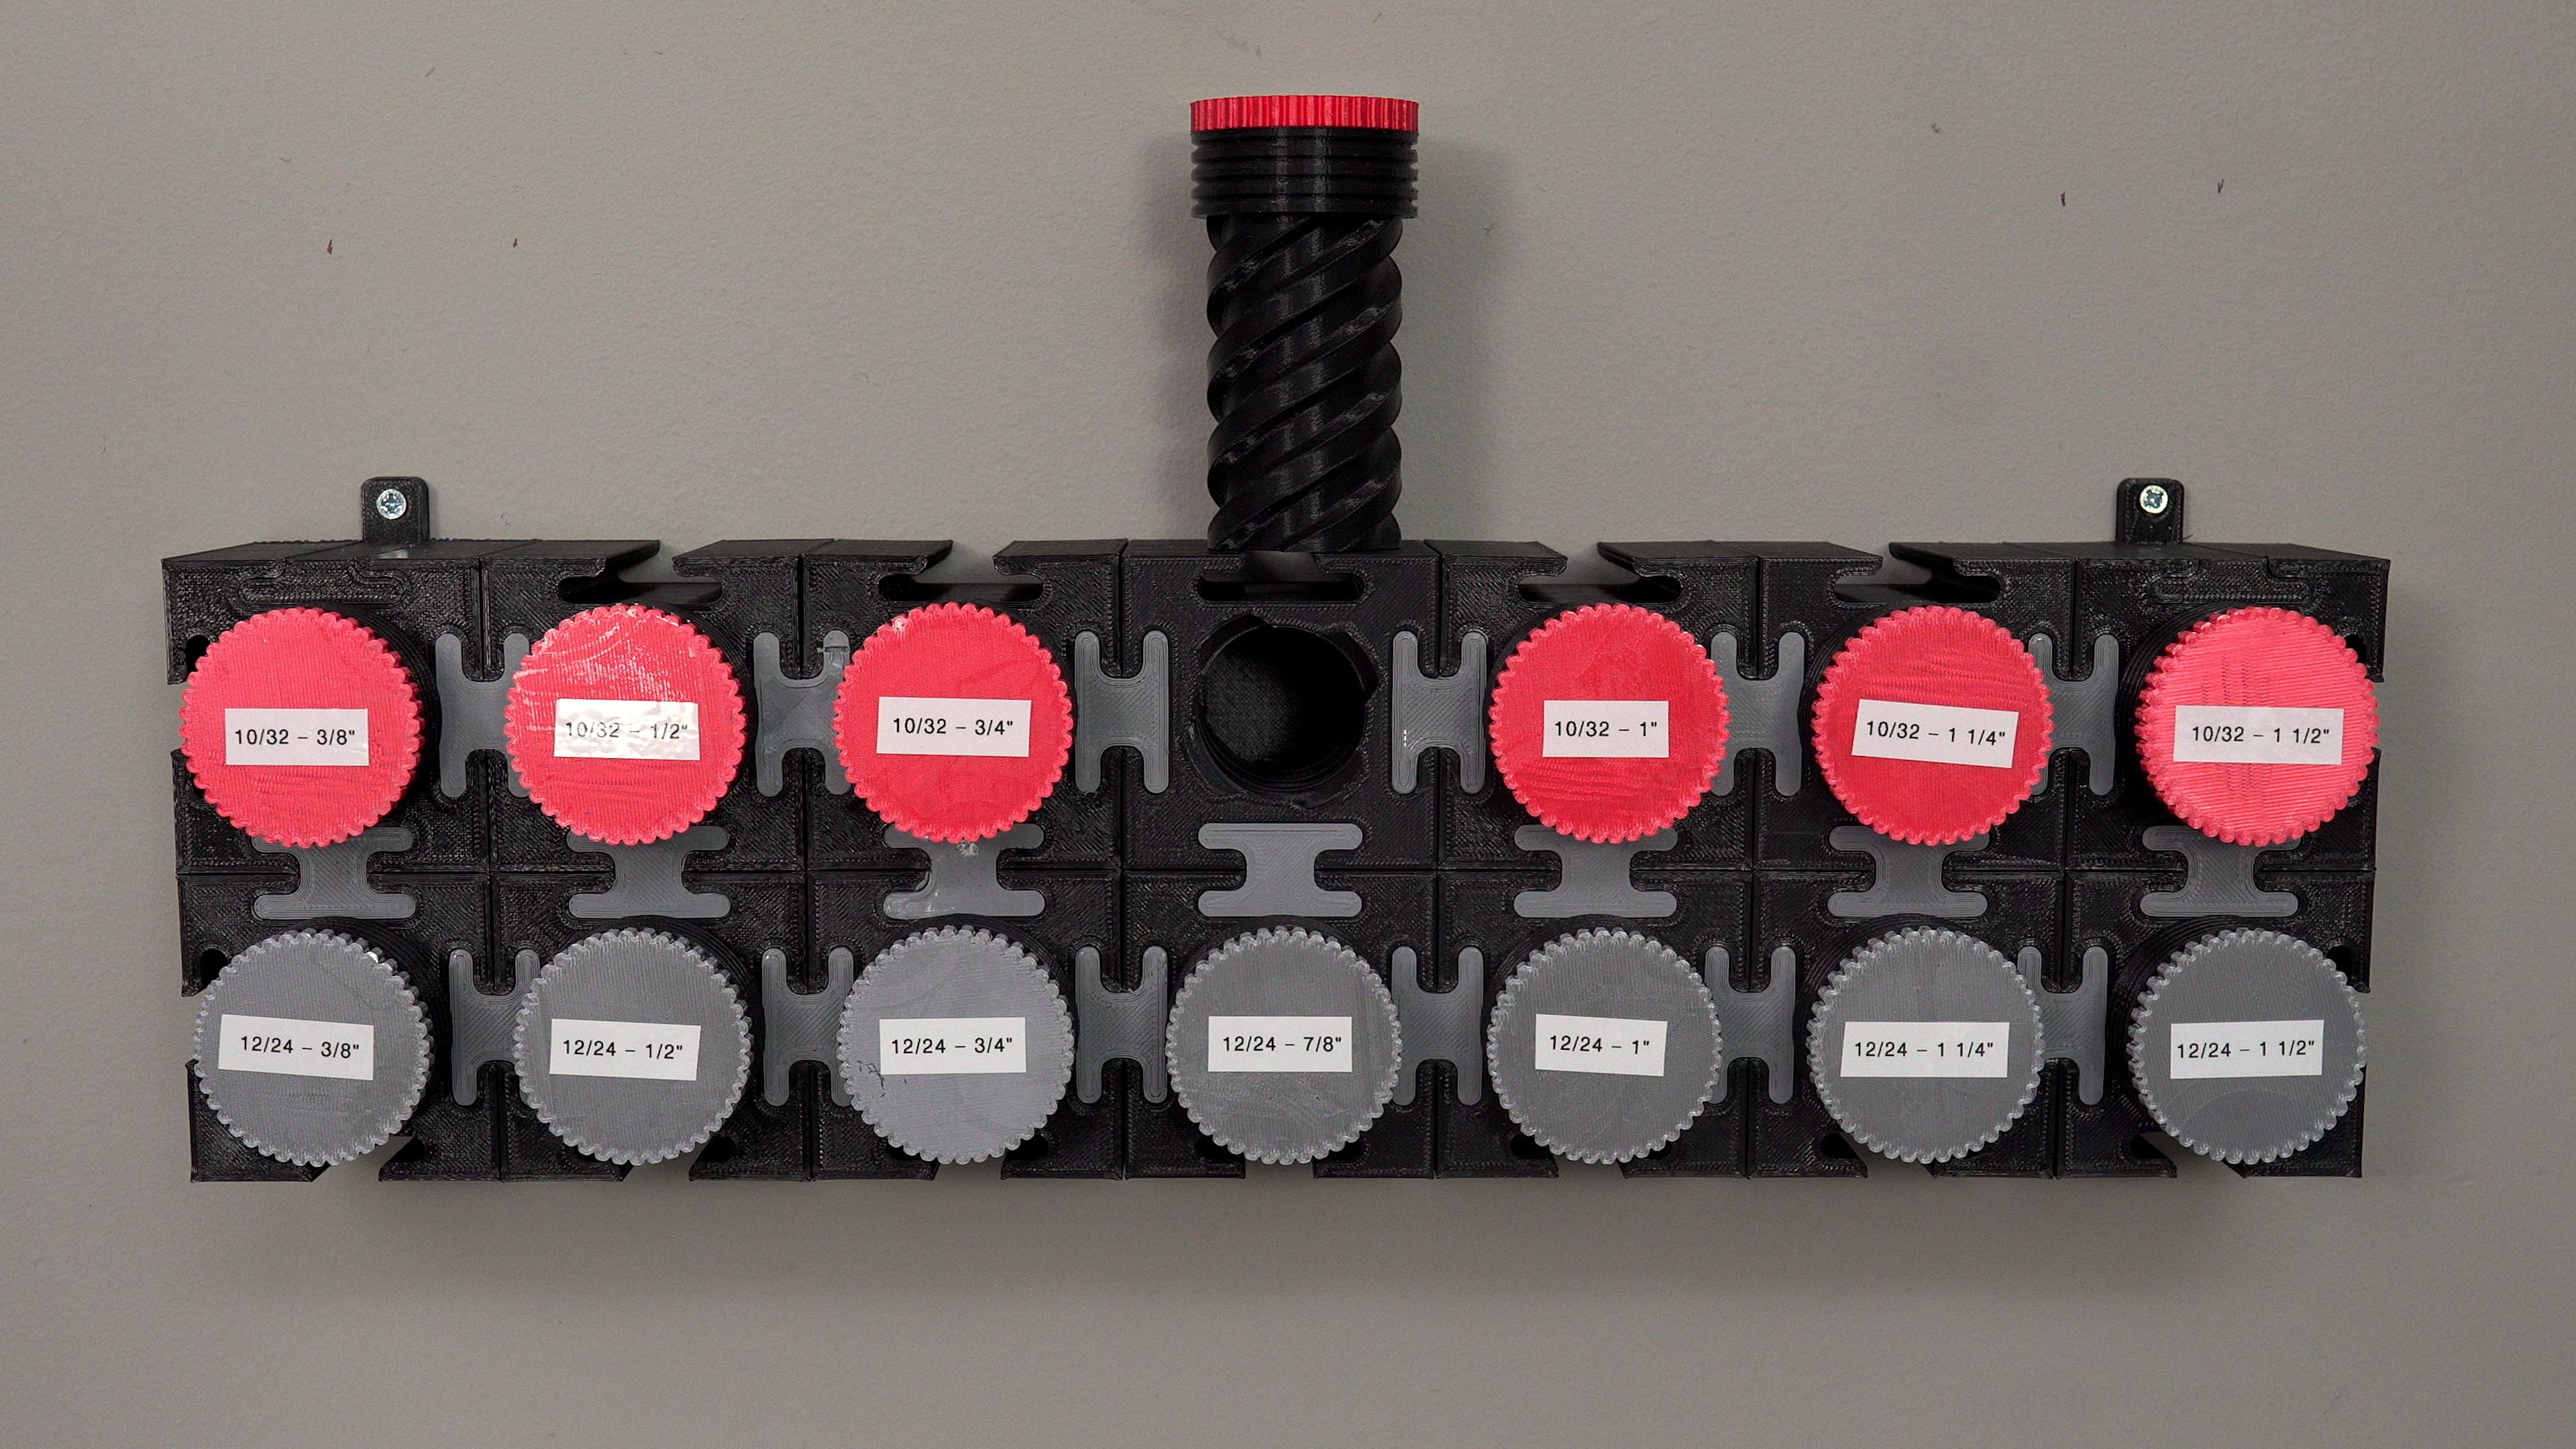 Modular Bolt Organizer  - This is a 2x7 matrix of the bolt organizer, which is mounted to my wall. The color of the cap symbolizes the pitch and diameter of the bolt, while the white label designates the length.  - 3d model